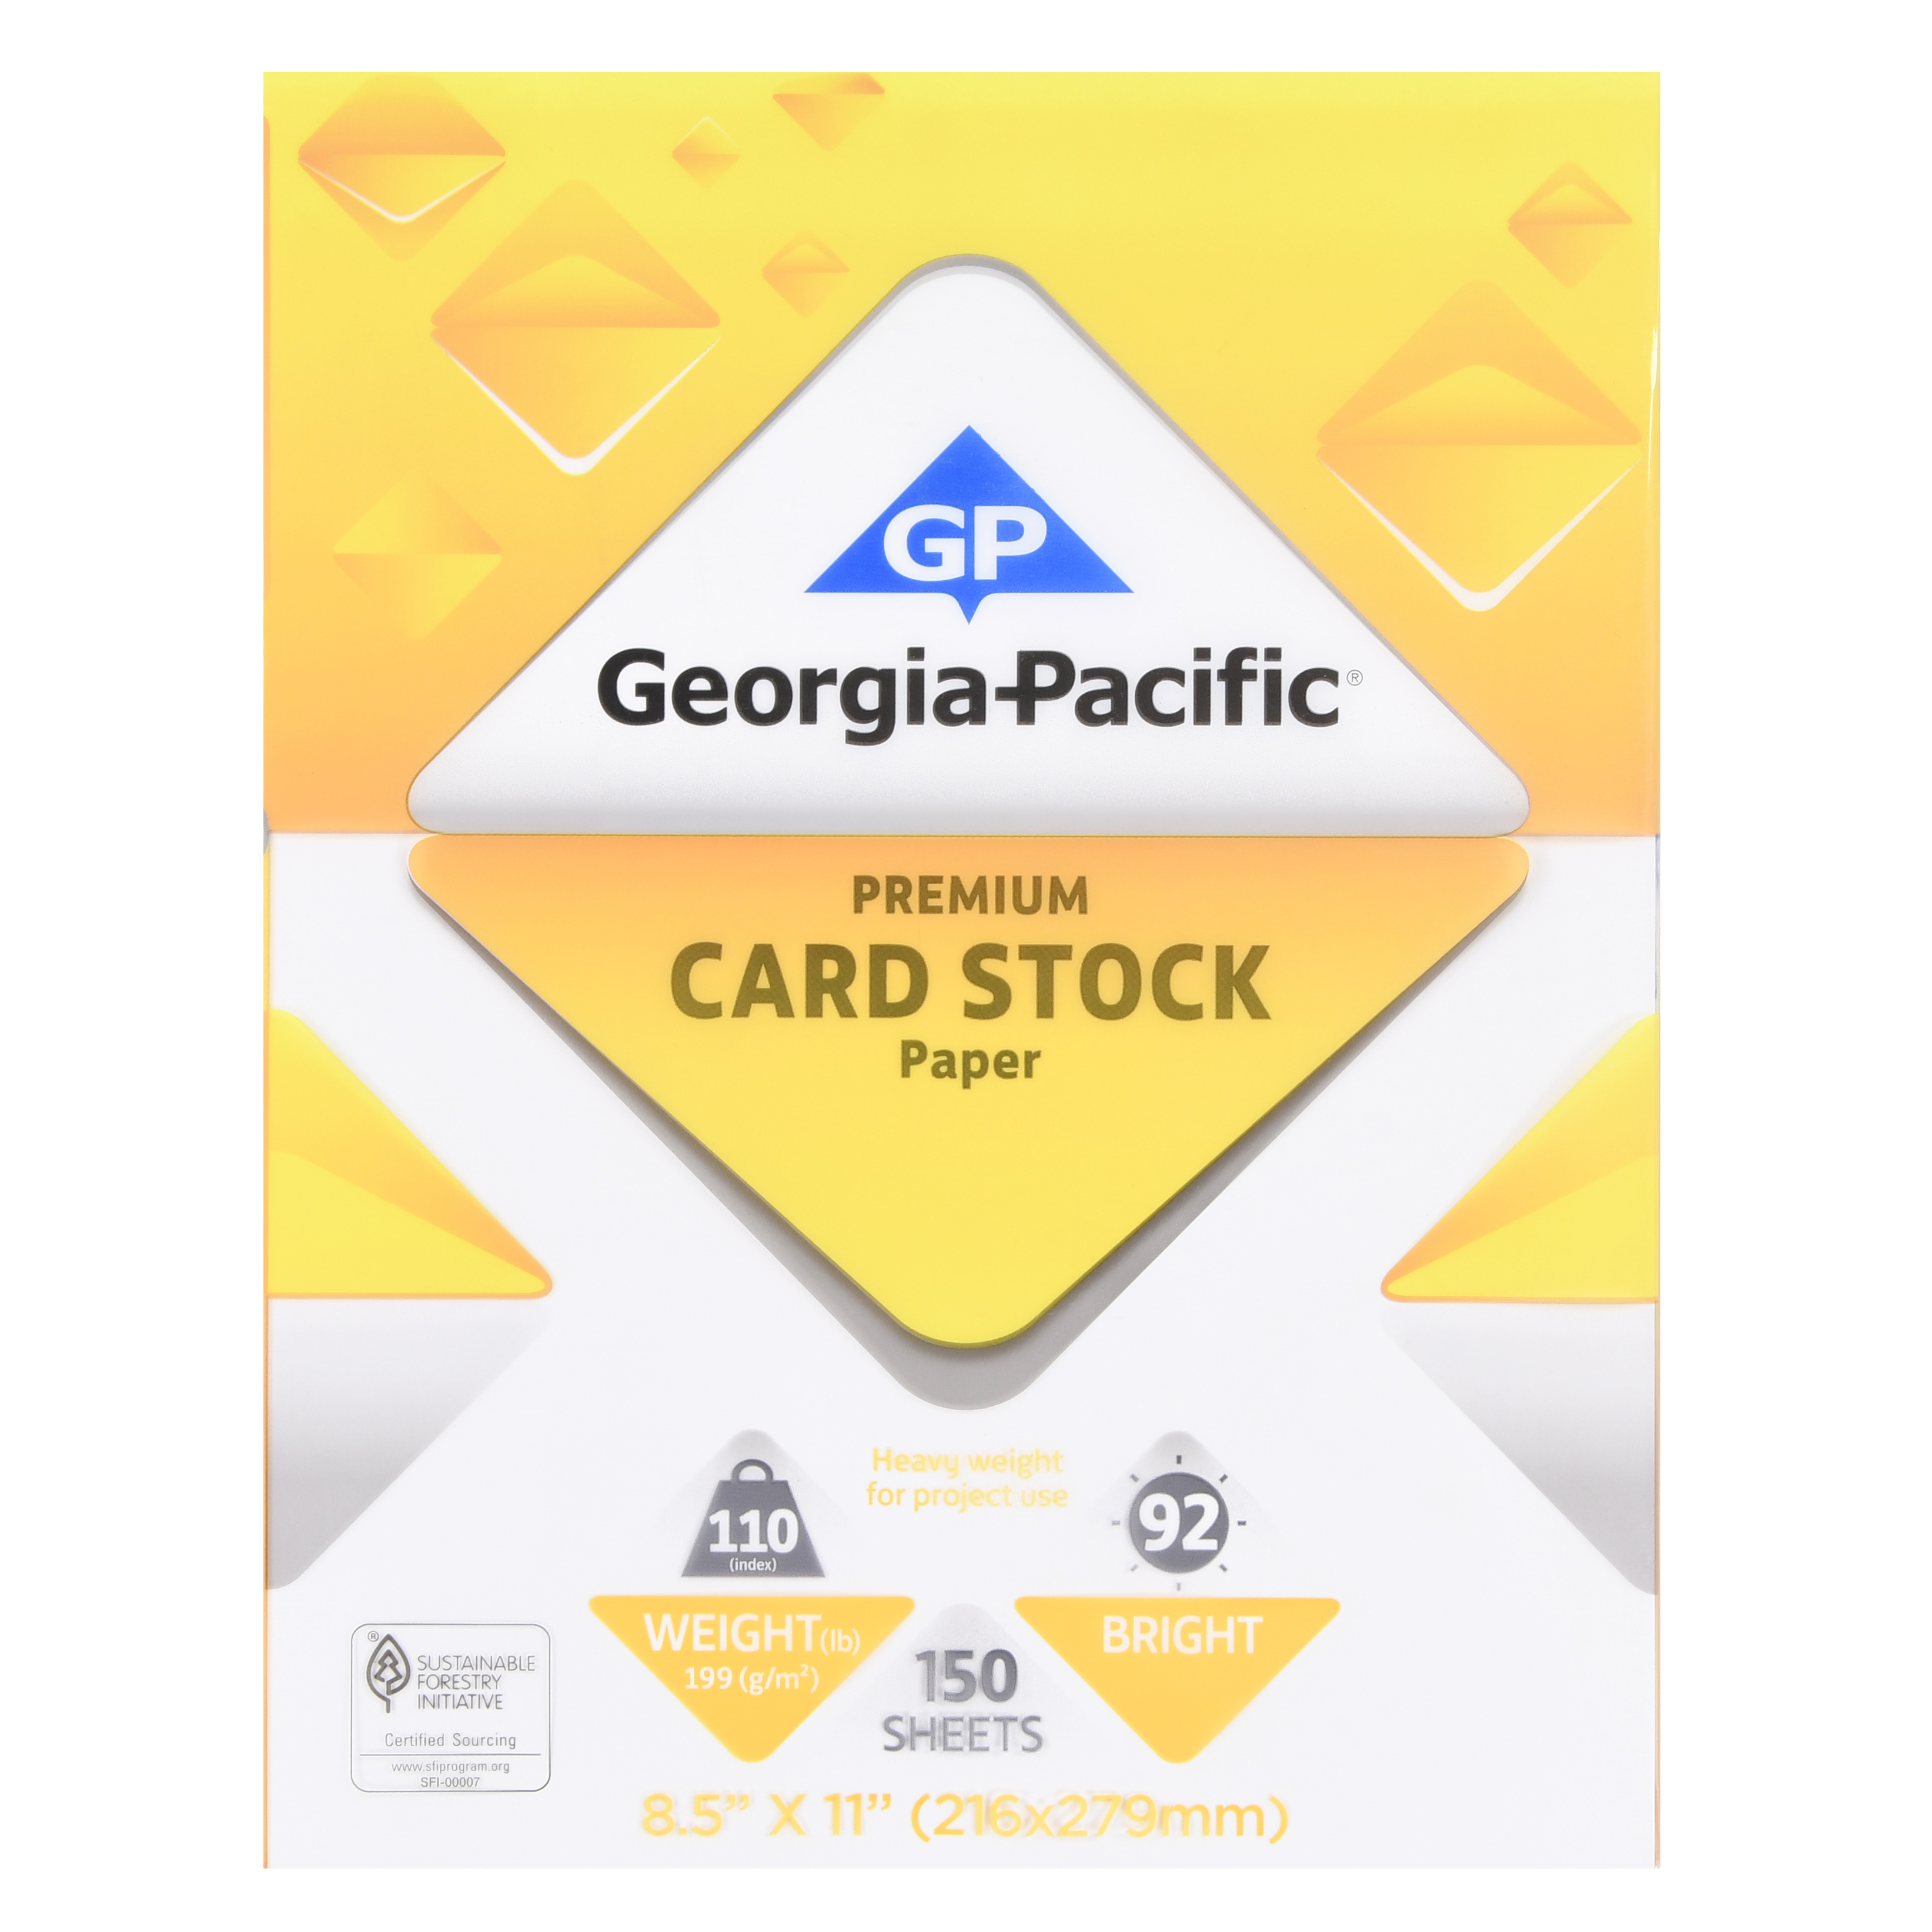 Georgia-Pacific White Cardstock Paper, 8.5" x 11", 110 lb, 150 Sheets - image 1 of 4